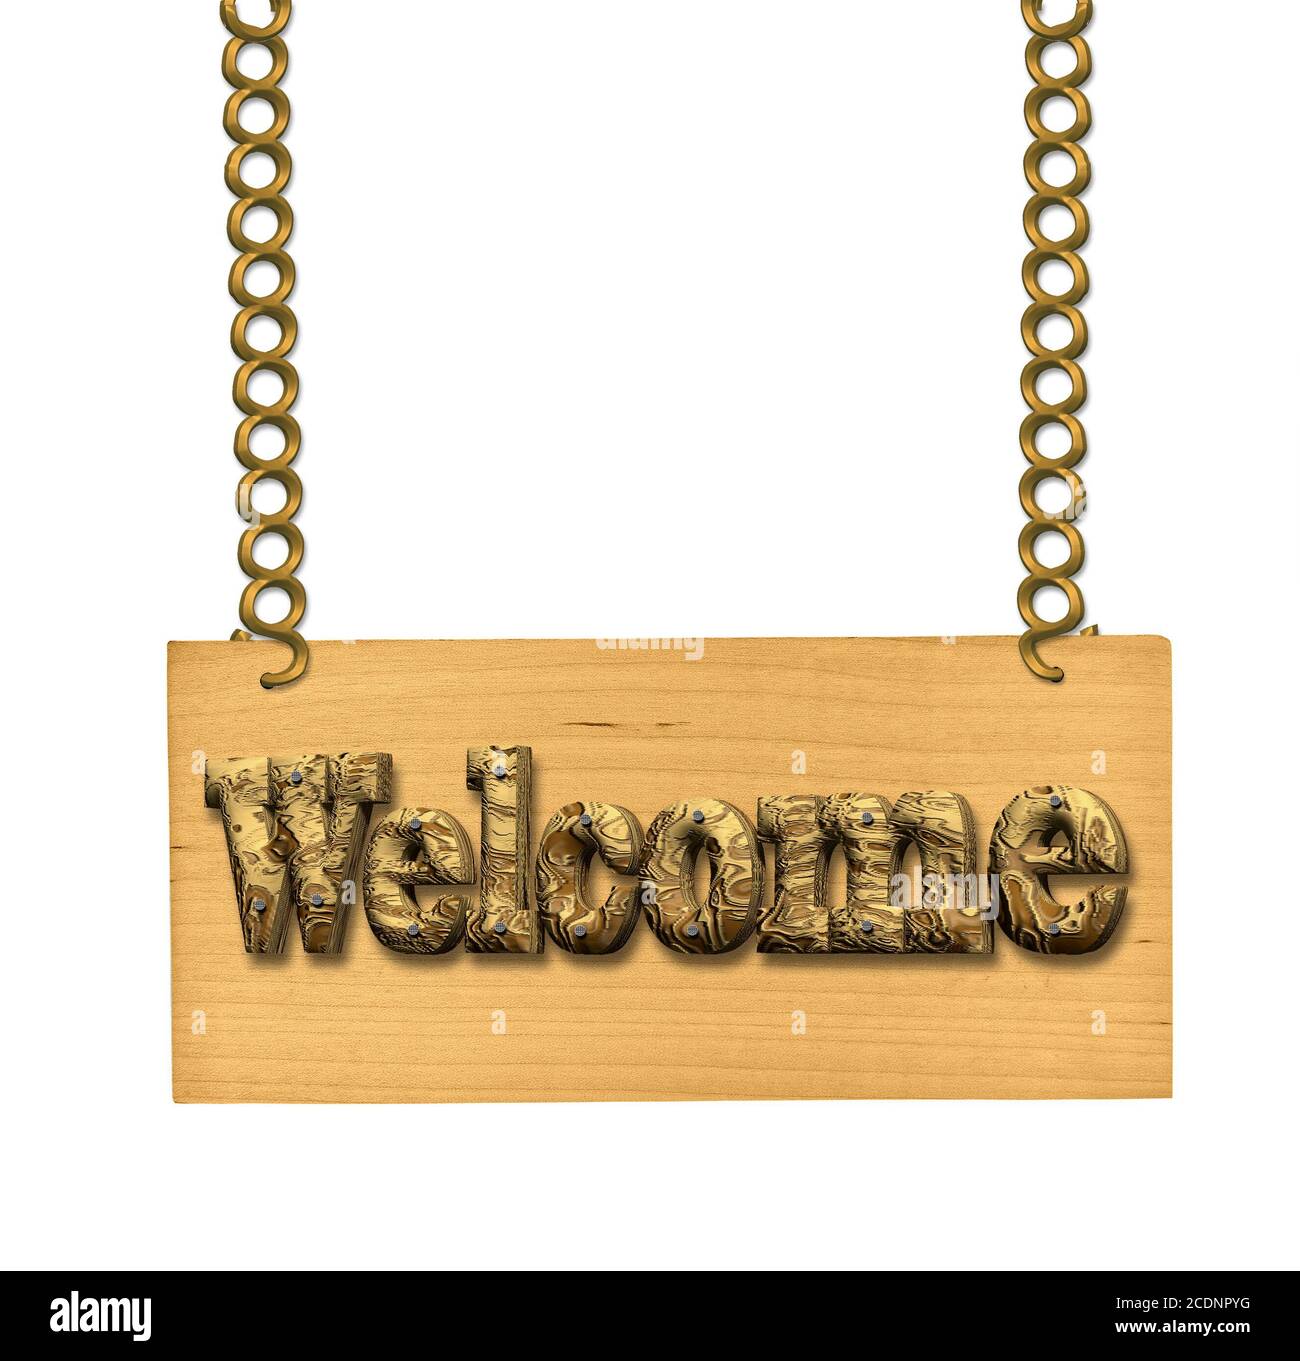 Wooden sign on the chains Stock Photo